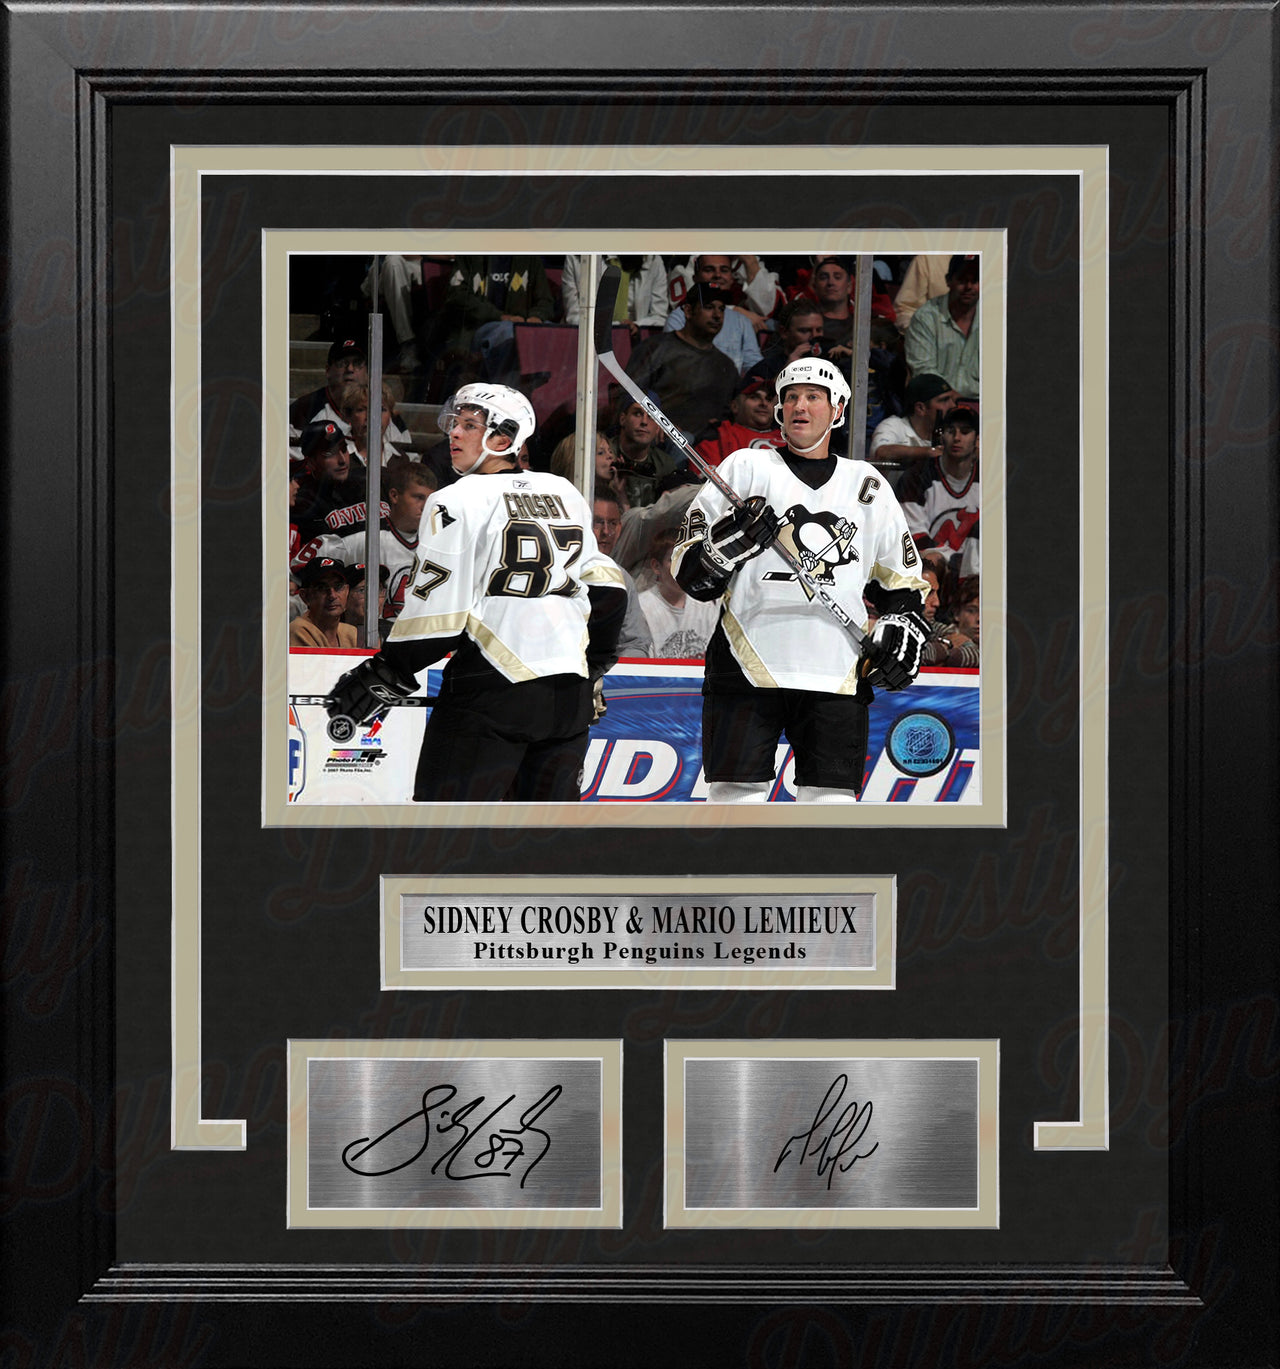 Sidney Crosby & Mario Lemieux Pittsburgh Penguins 8x10 Framed Hockey Photo with Engraved Autographs